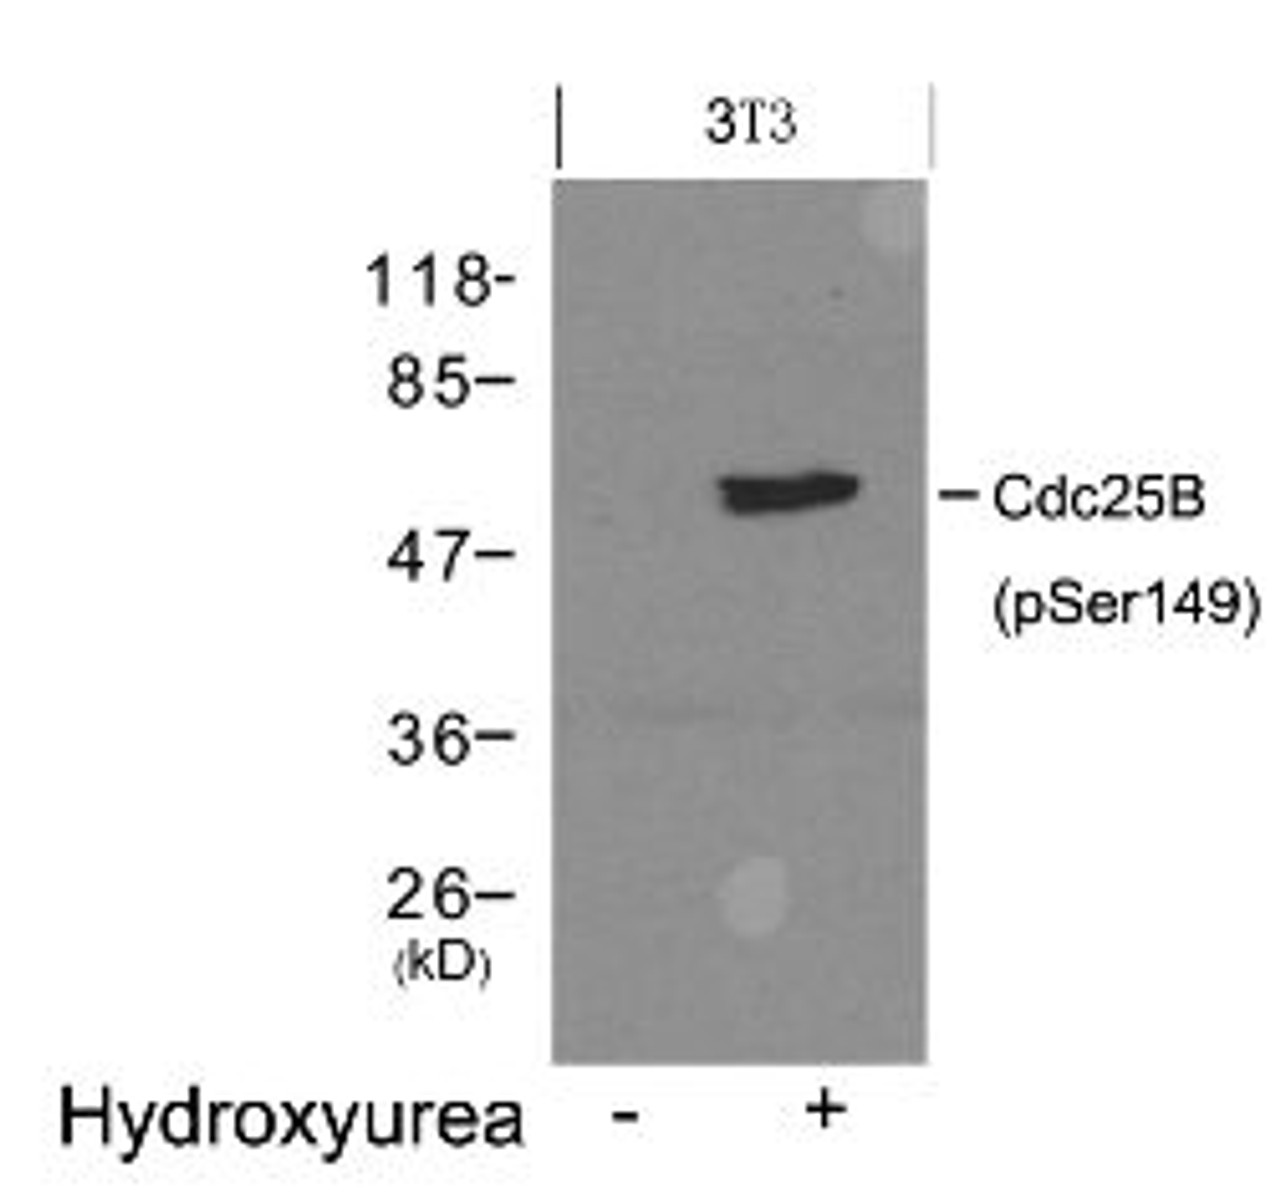 Western blot analysis of lysed extracts from 3T3 cells untreated (Lane 1) or treated with Hydroxyurea (lane 2) using Cdc25B (Phospho-Ser149) .